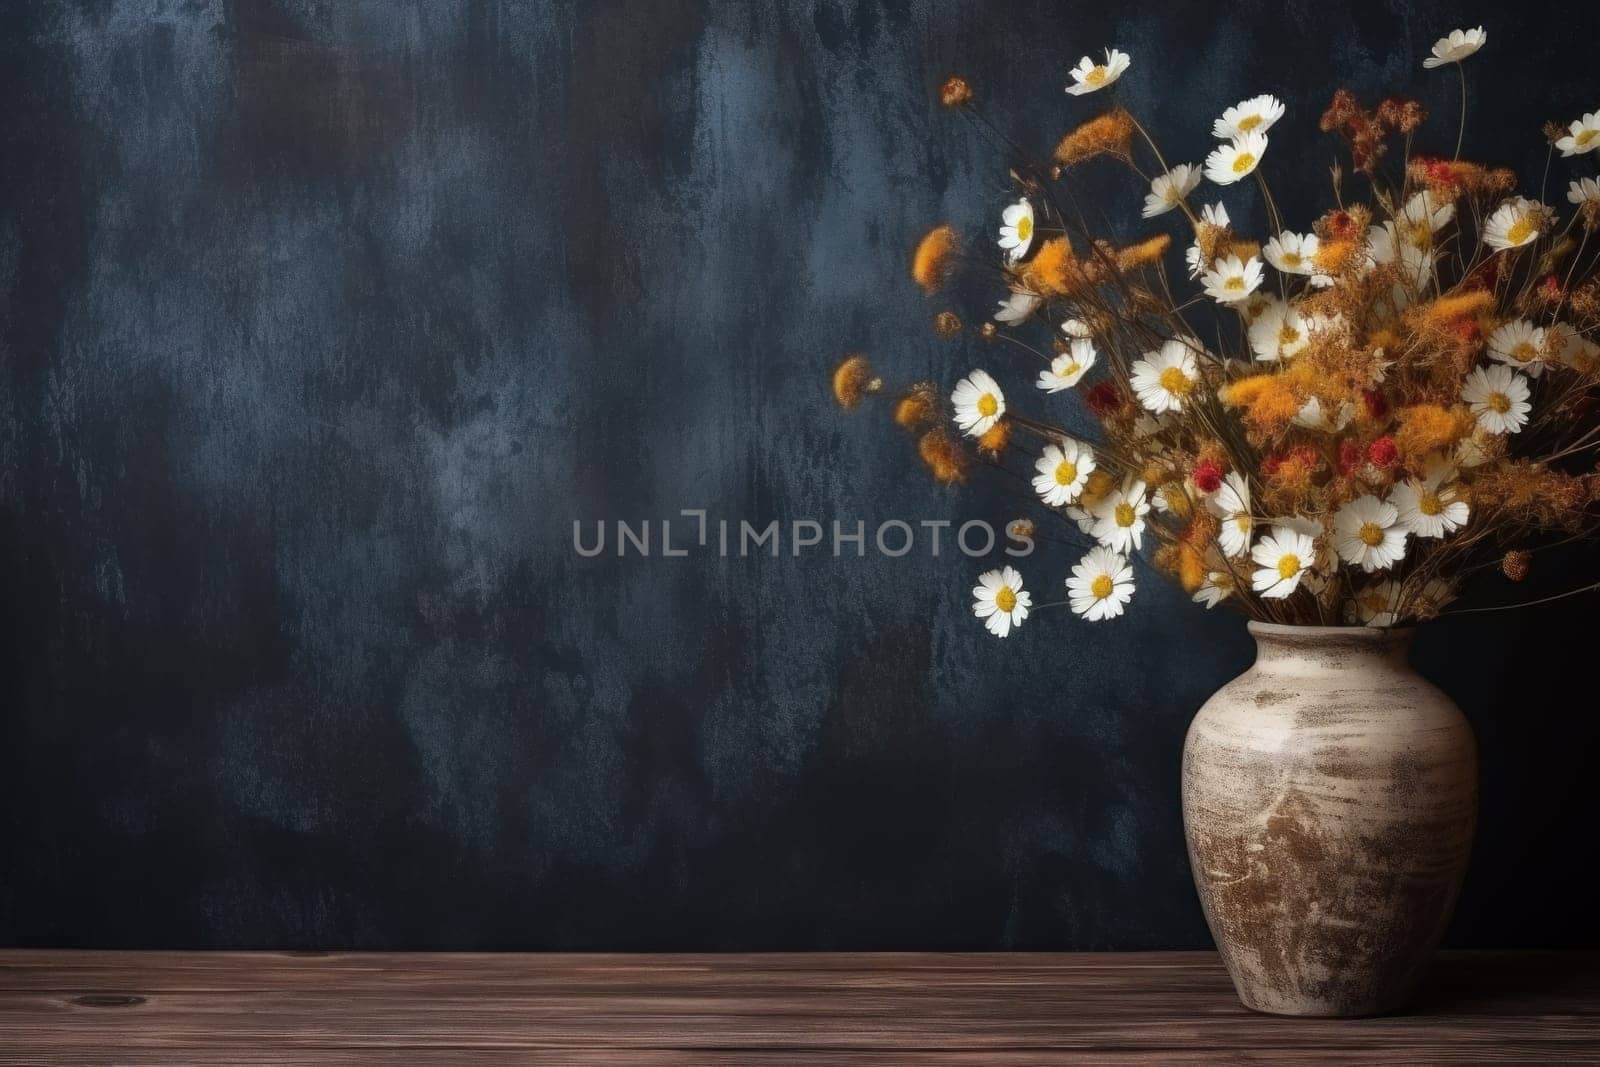 Vase of wildflowers on wooden table and pastel wall texture background.